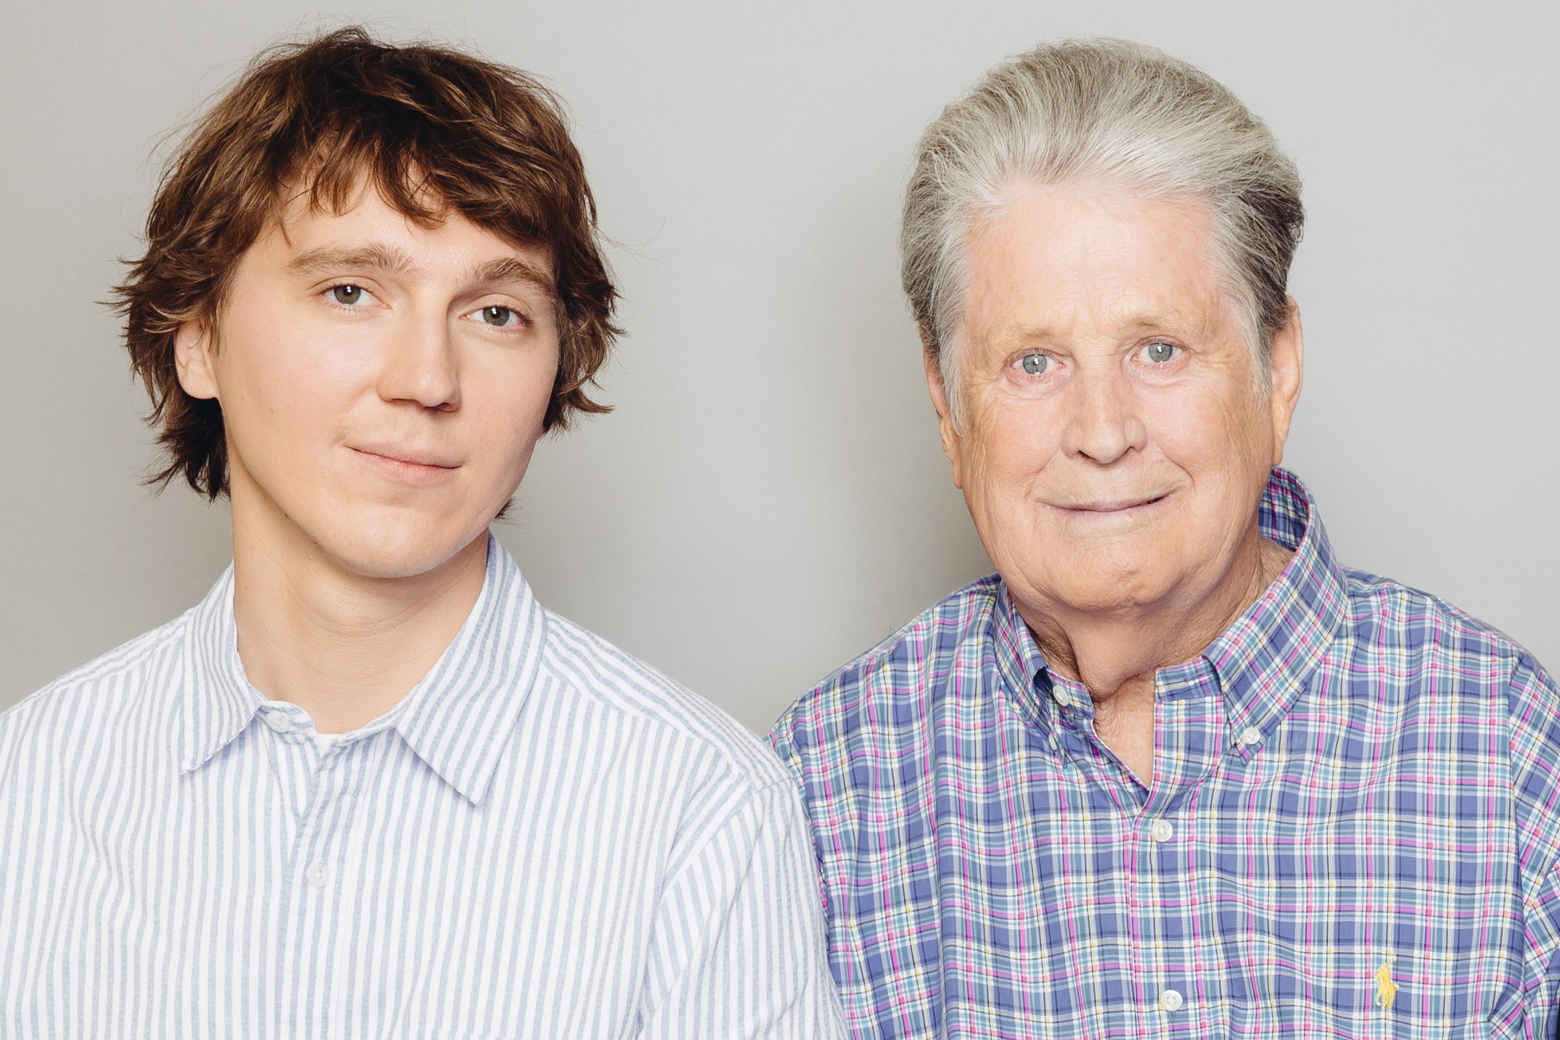 Paul Dano, Brian Wilson, and John Cusack pose for a portrait during press day for "Love &amp; Mercy" at The Four Seasons on Tuesday, June 2, 2015 in Los Angeles. (Photo by Casey Curry/Invision/AP)